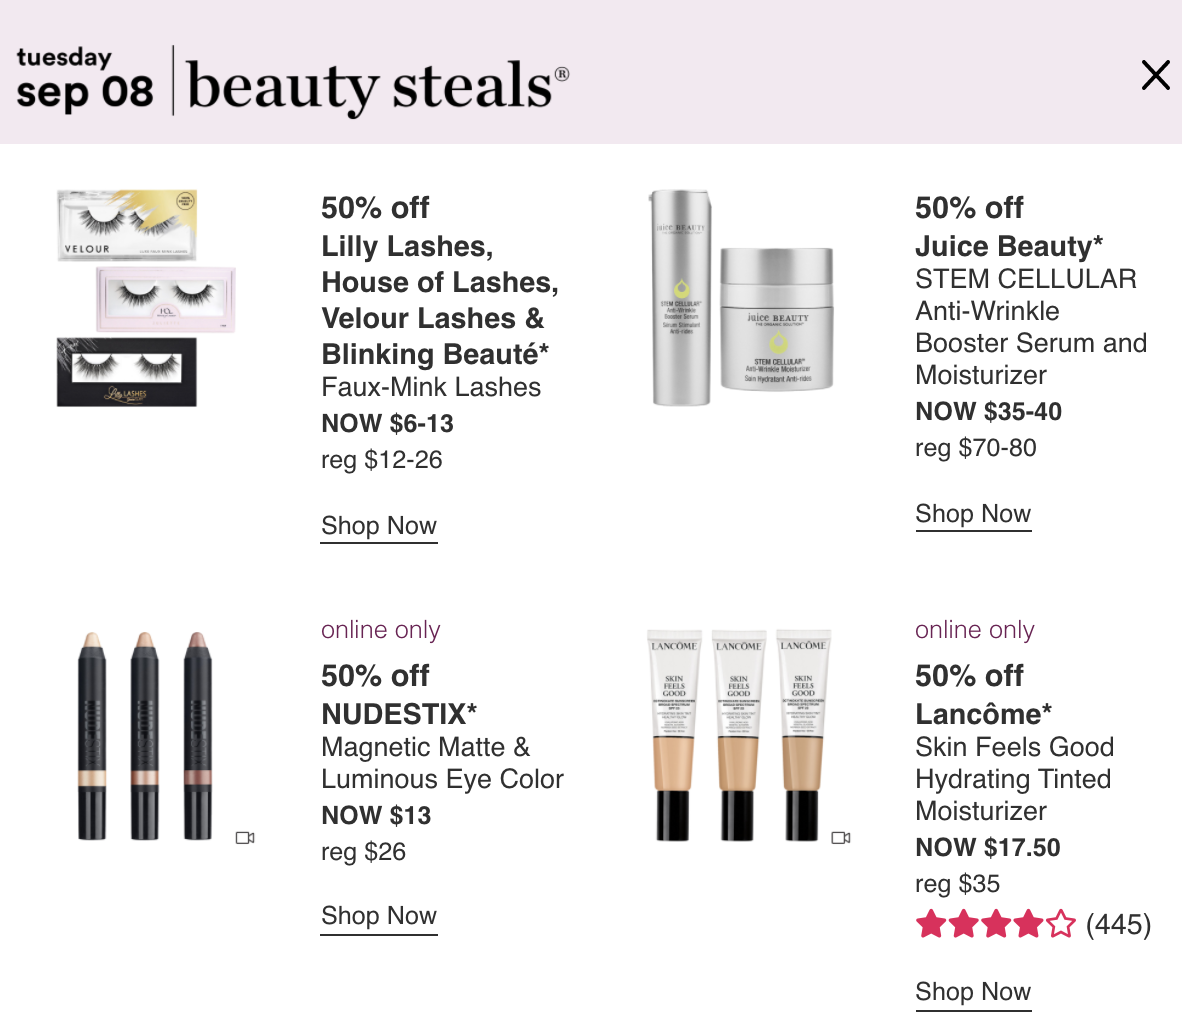 Ulta 21 Days of Beauty - 9/8 DAY 10 (tomorrow) - Gift With Purchase